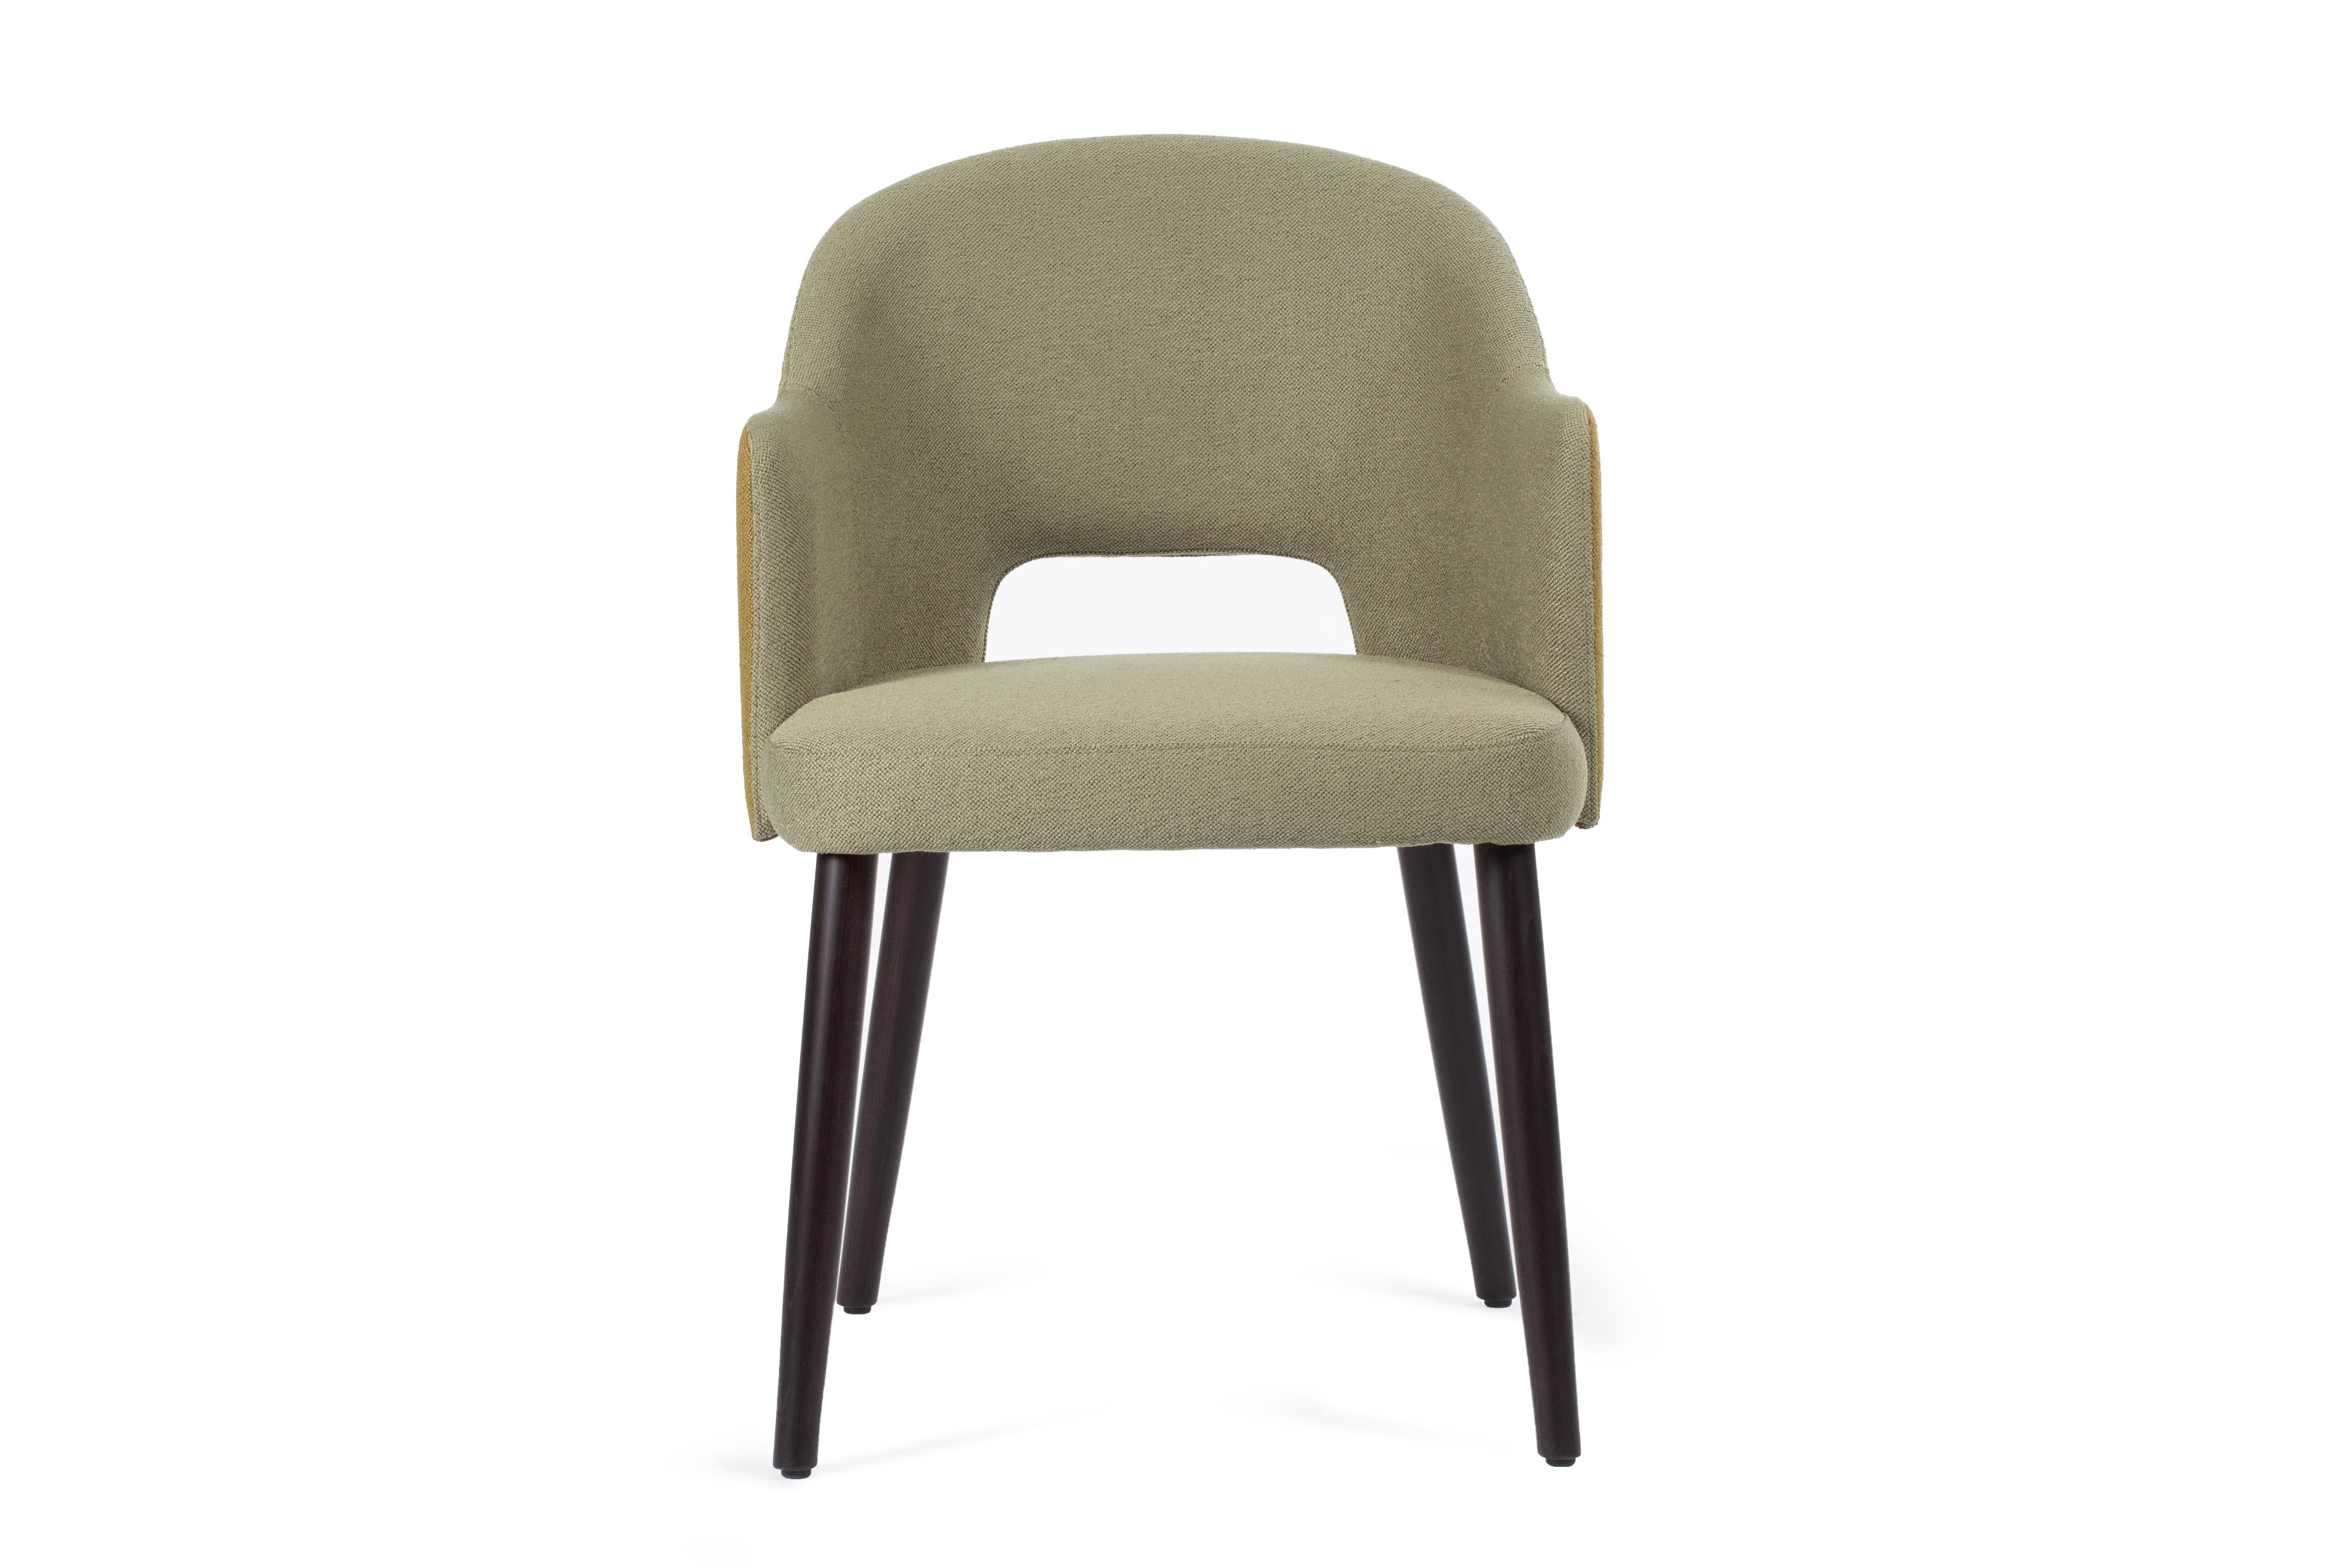 Italian 21st Century Ary Chair, Free Life Fabric and Wood, Made in Italy by Hebanon For Sale